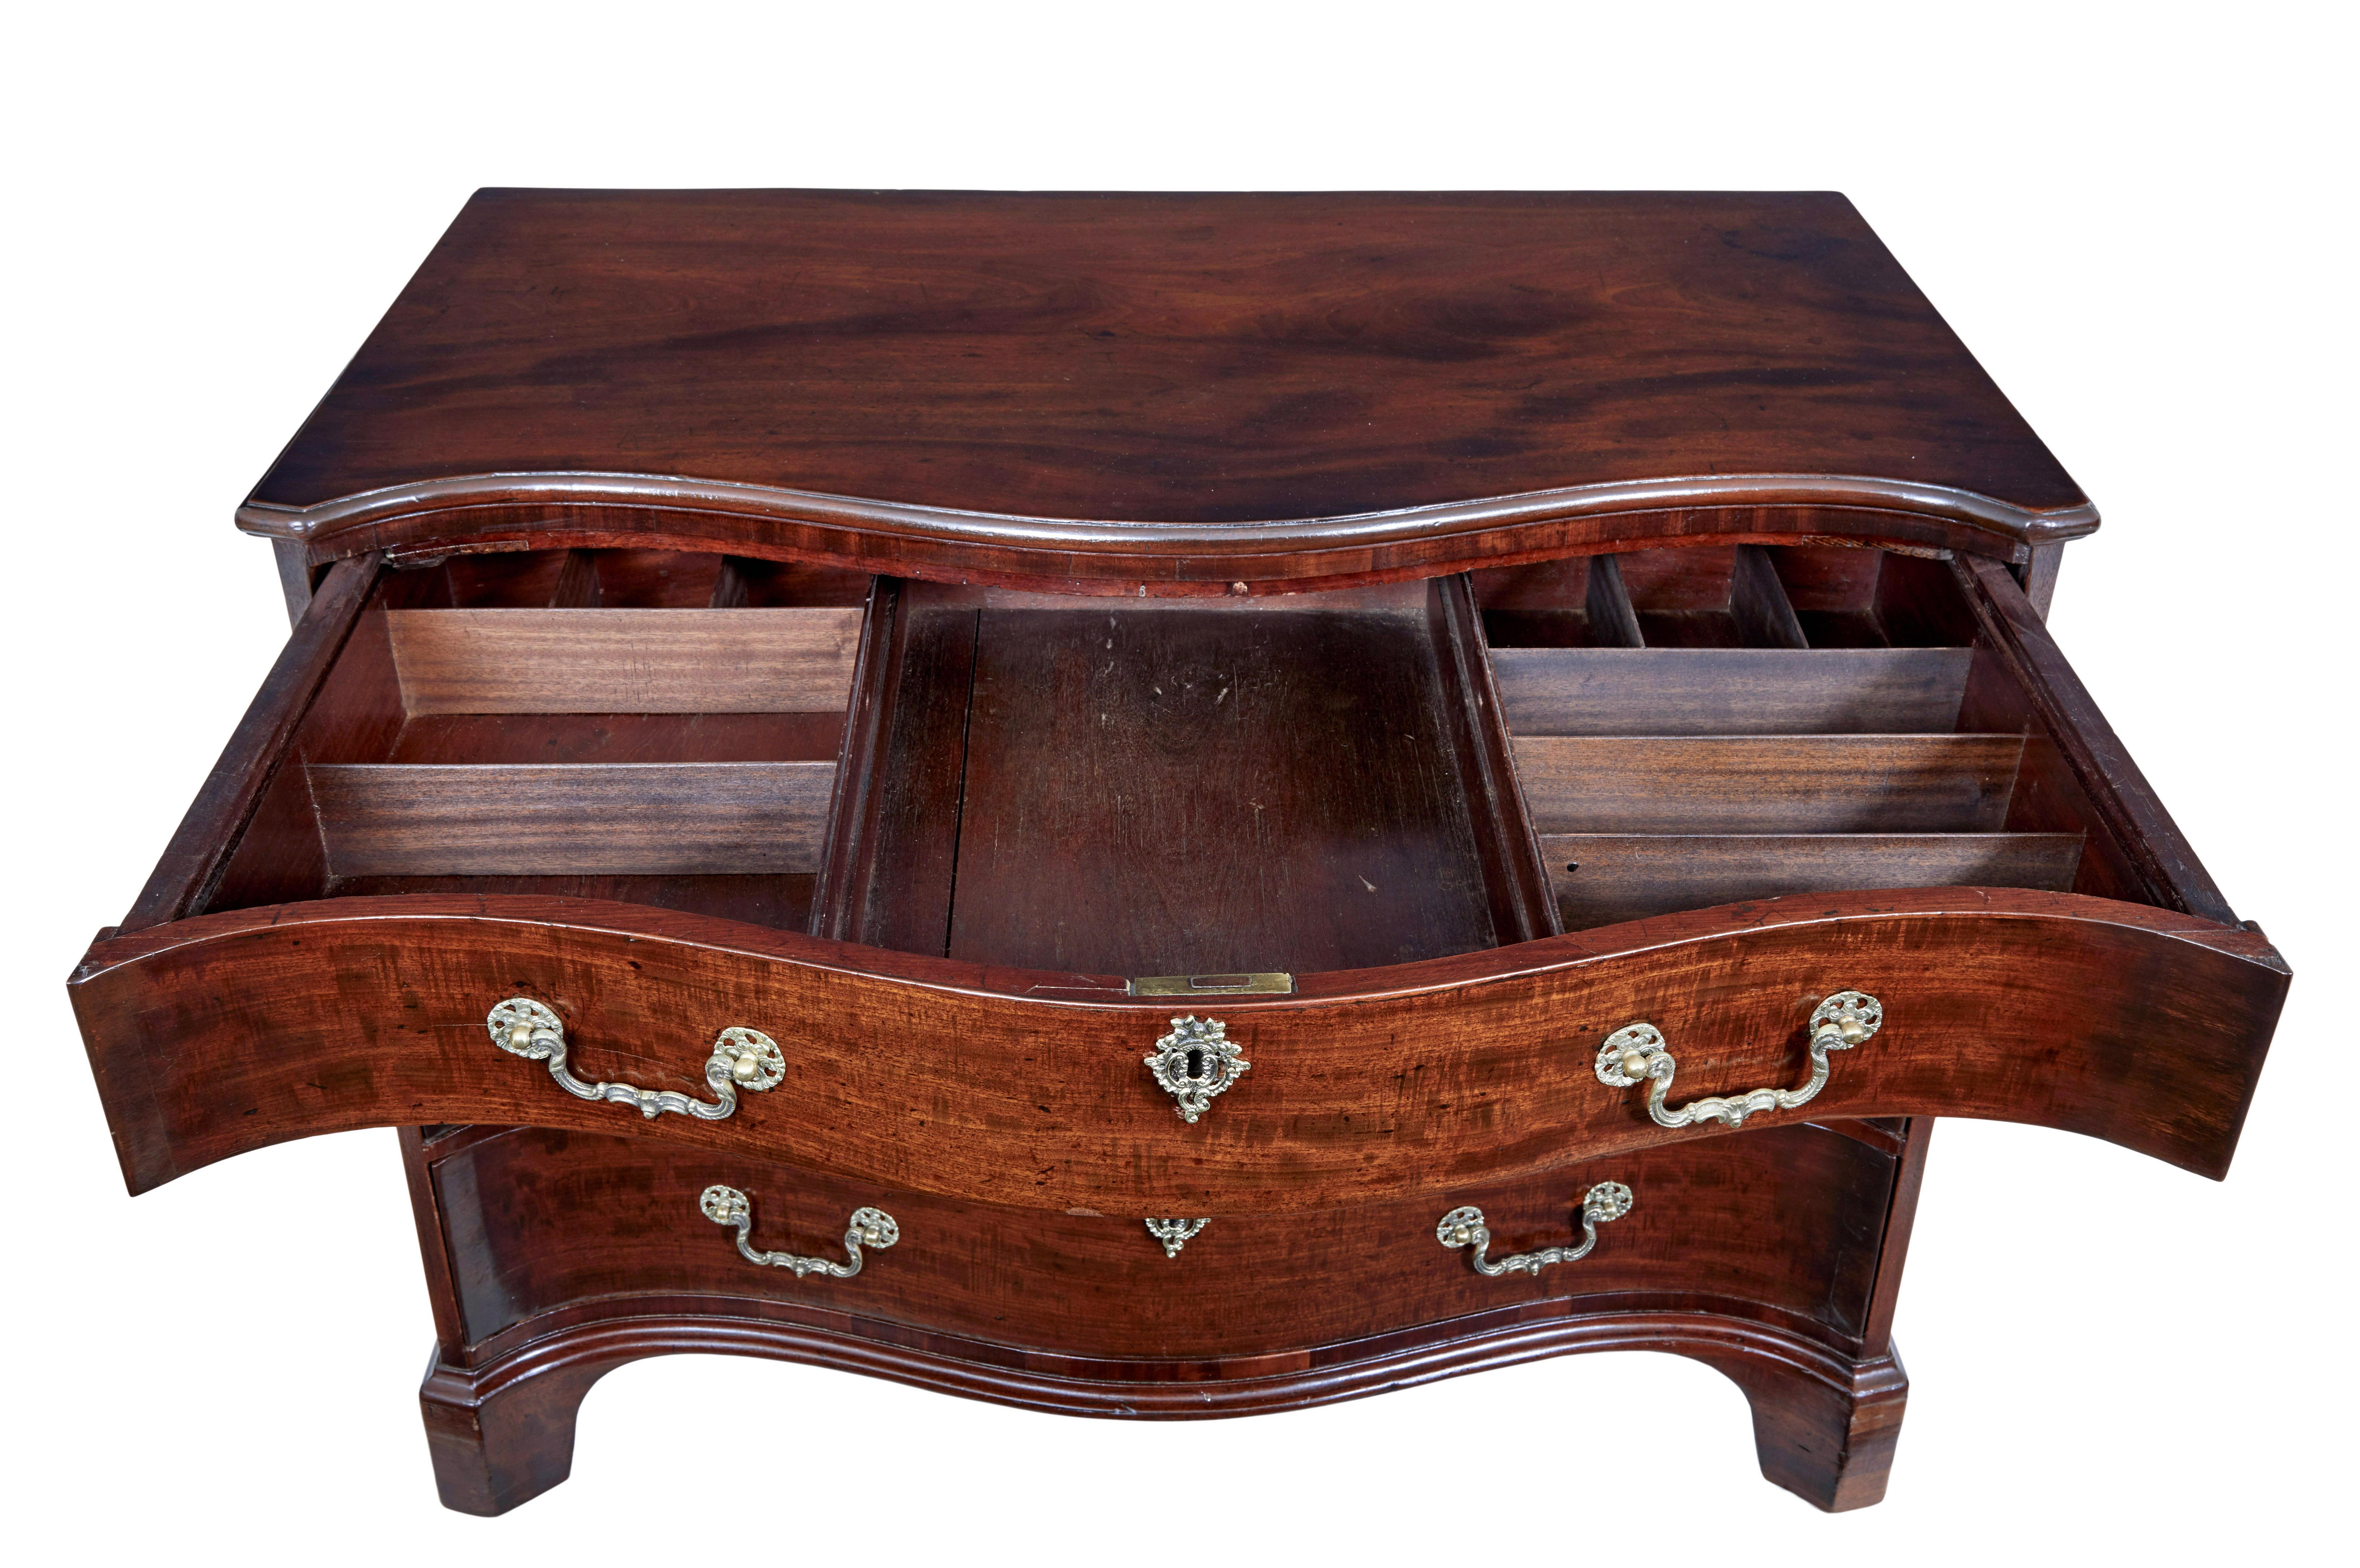 18th century Georgian mahogany serpentine chest of drawers For Sale 2